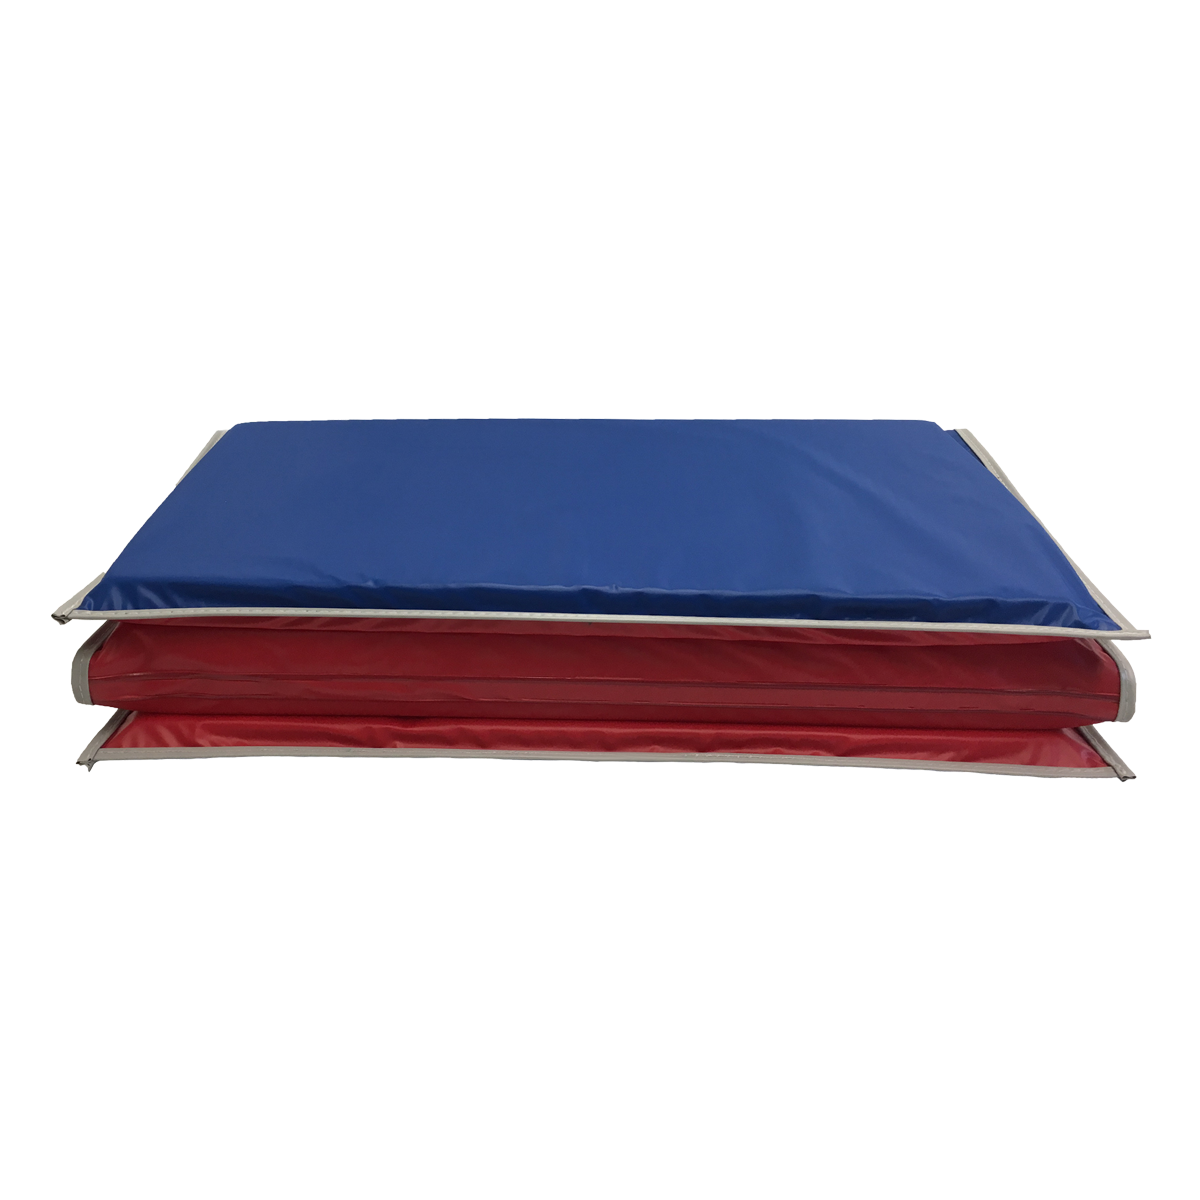 Basic Kinder Rest Mat with Binding 1"